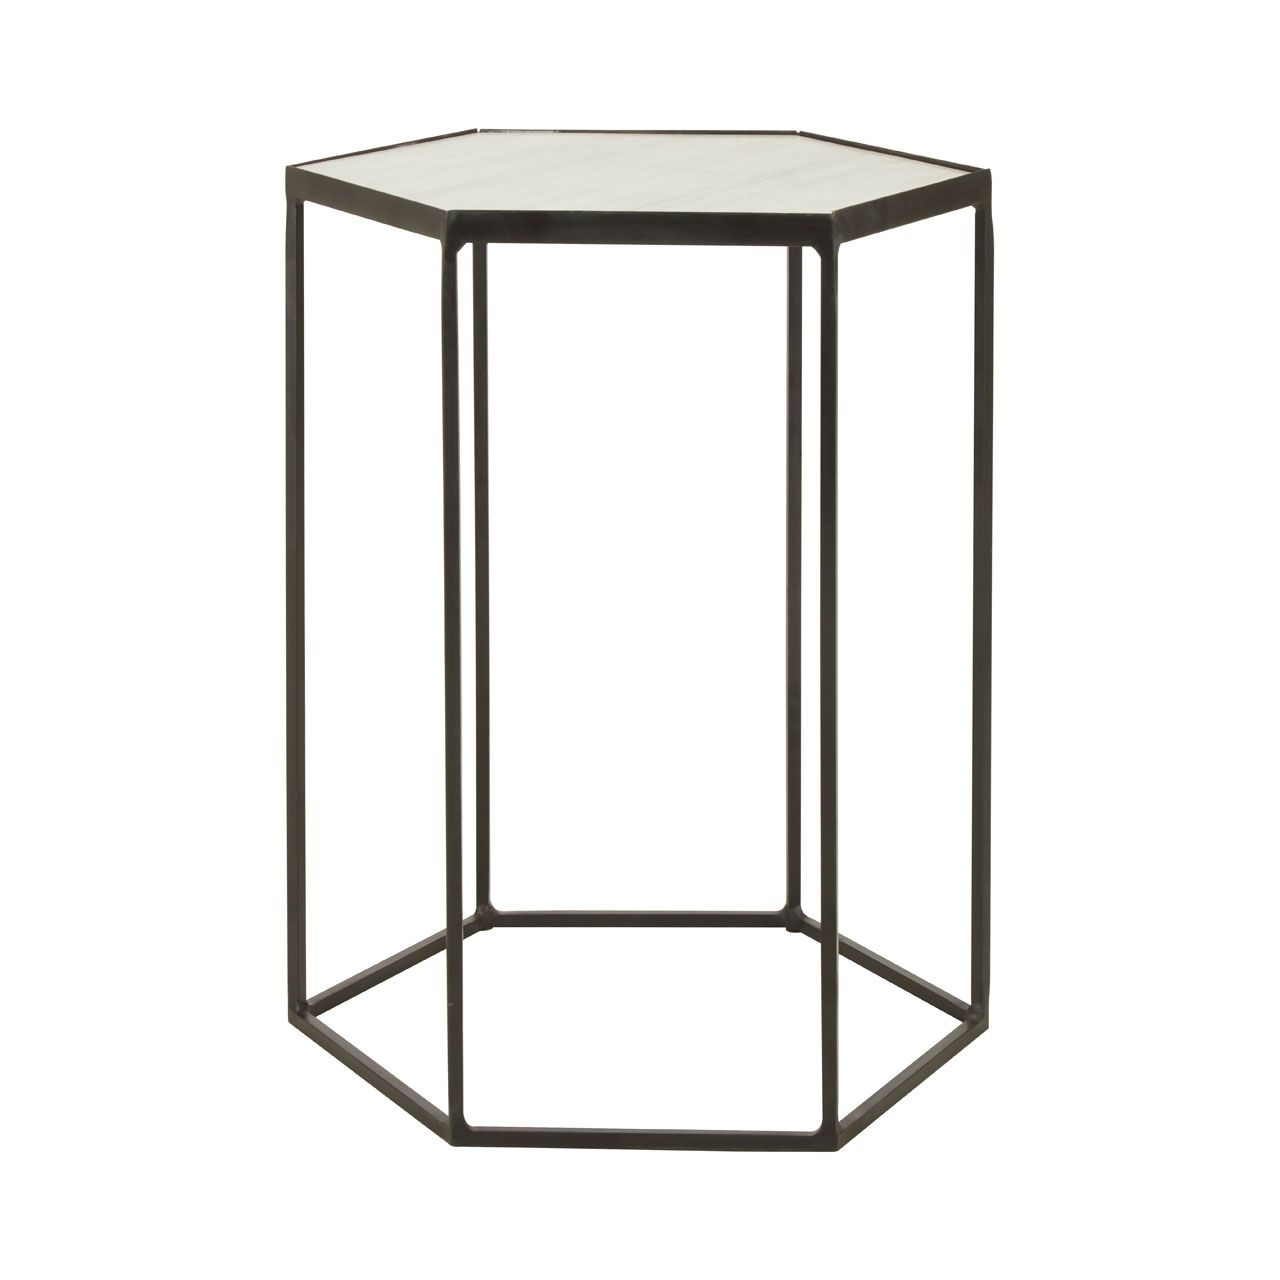 Rabia Hexagonal White Marble Top Side Table With Black Metal Base